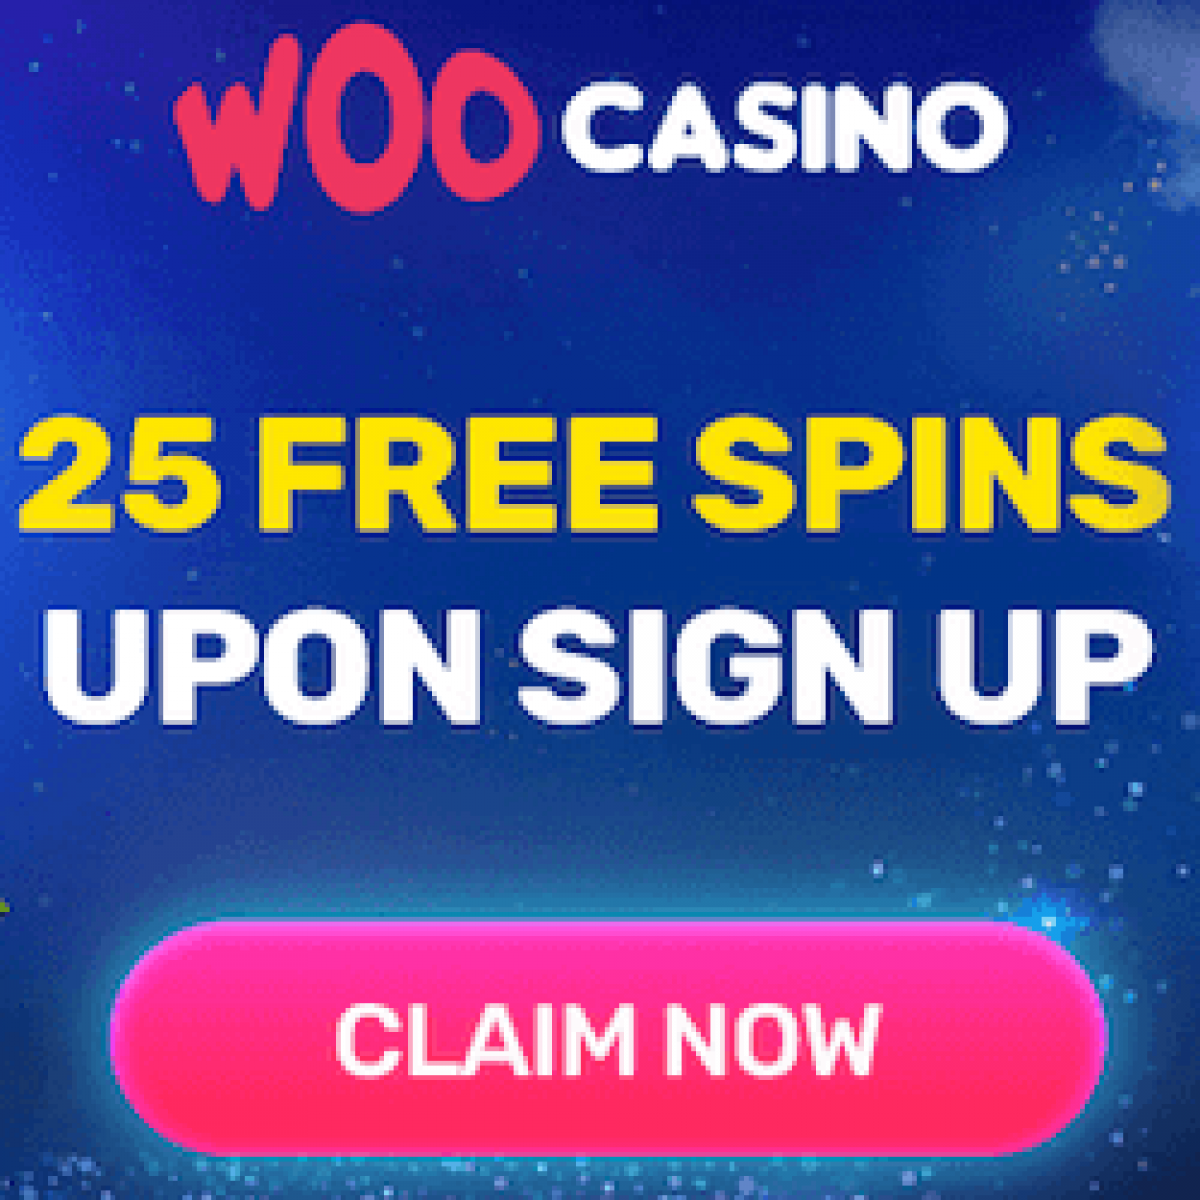 More on Making a Living Off of woo casino australia